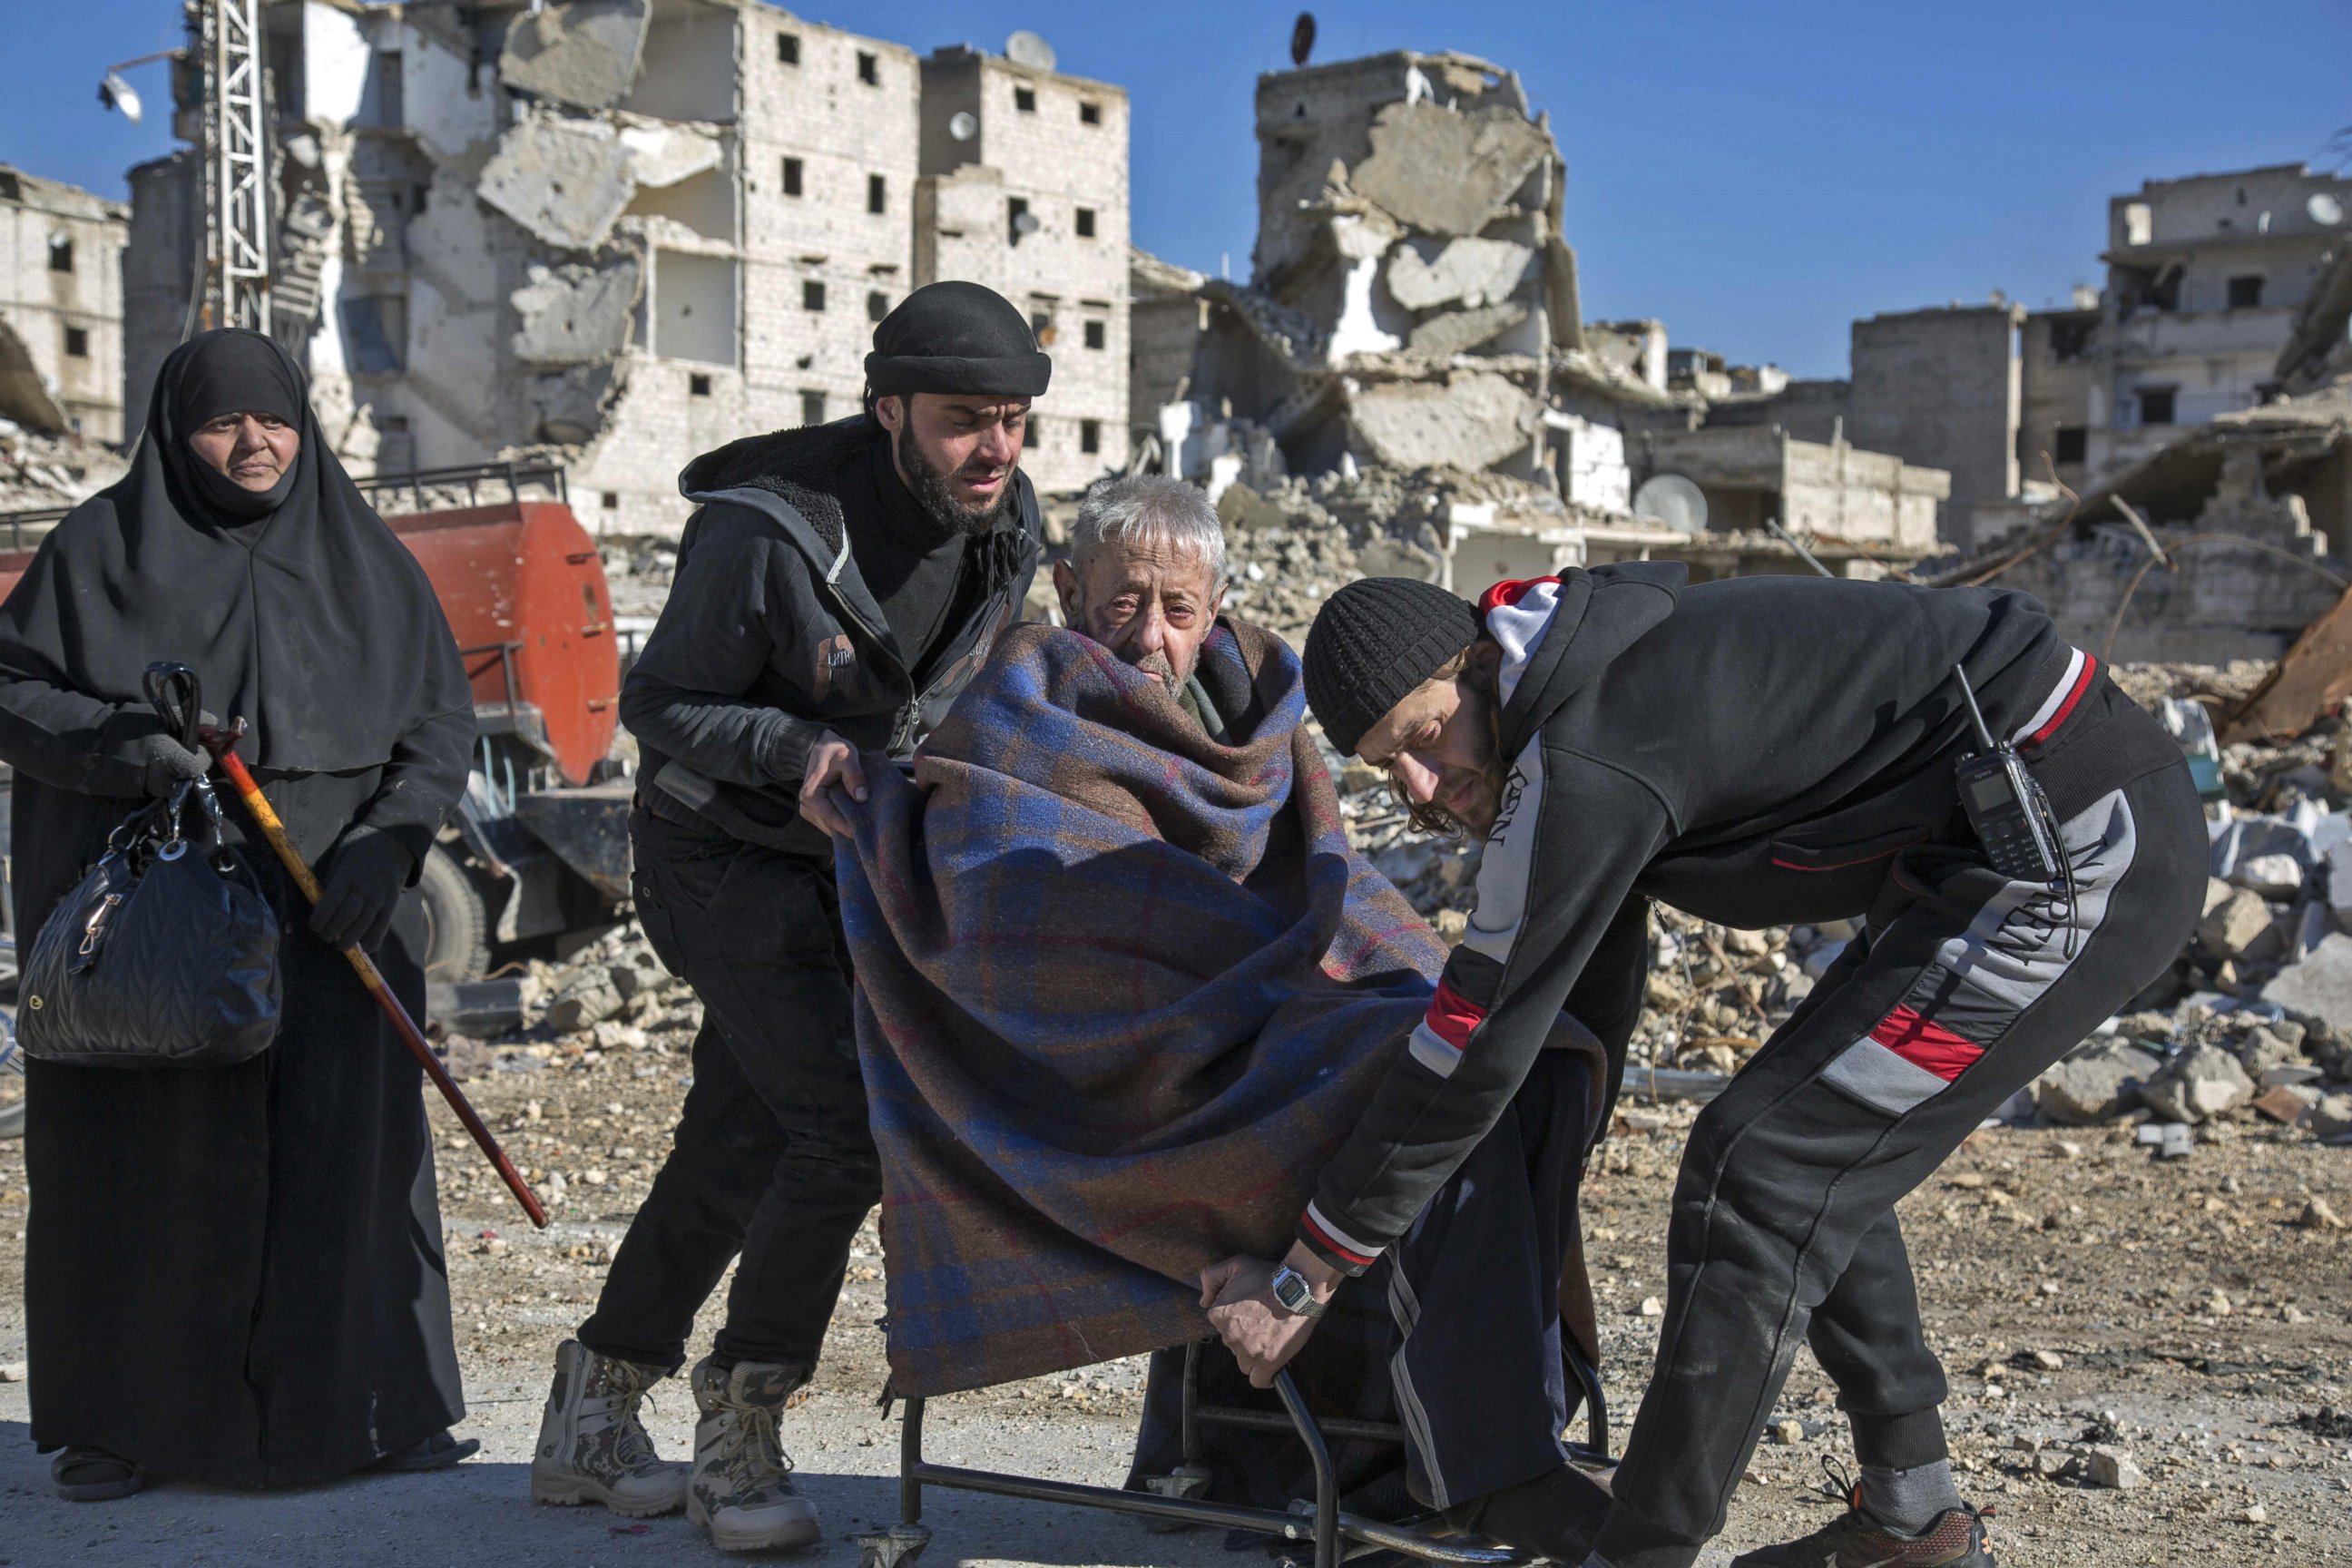 PHOTO: An elderly Syrian man is carried during an evacuation operation of rebel fighters and their families from rebel-held neighborhoods, Dec. 15, 2016 in Aleppo, Syria.